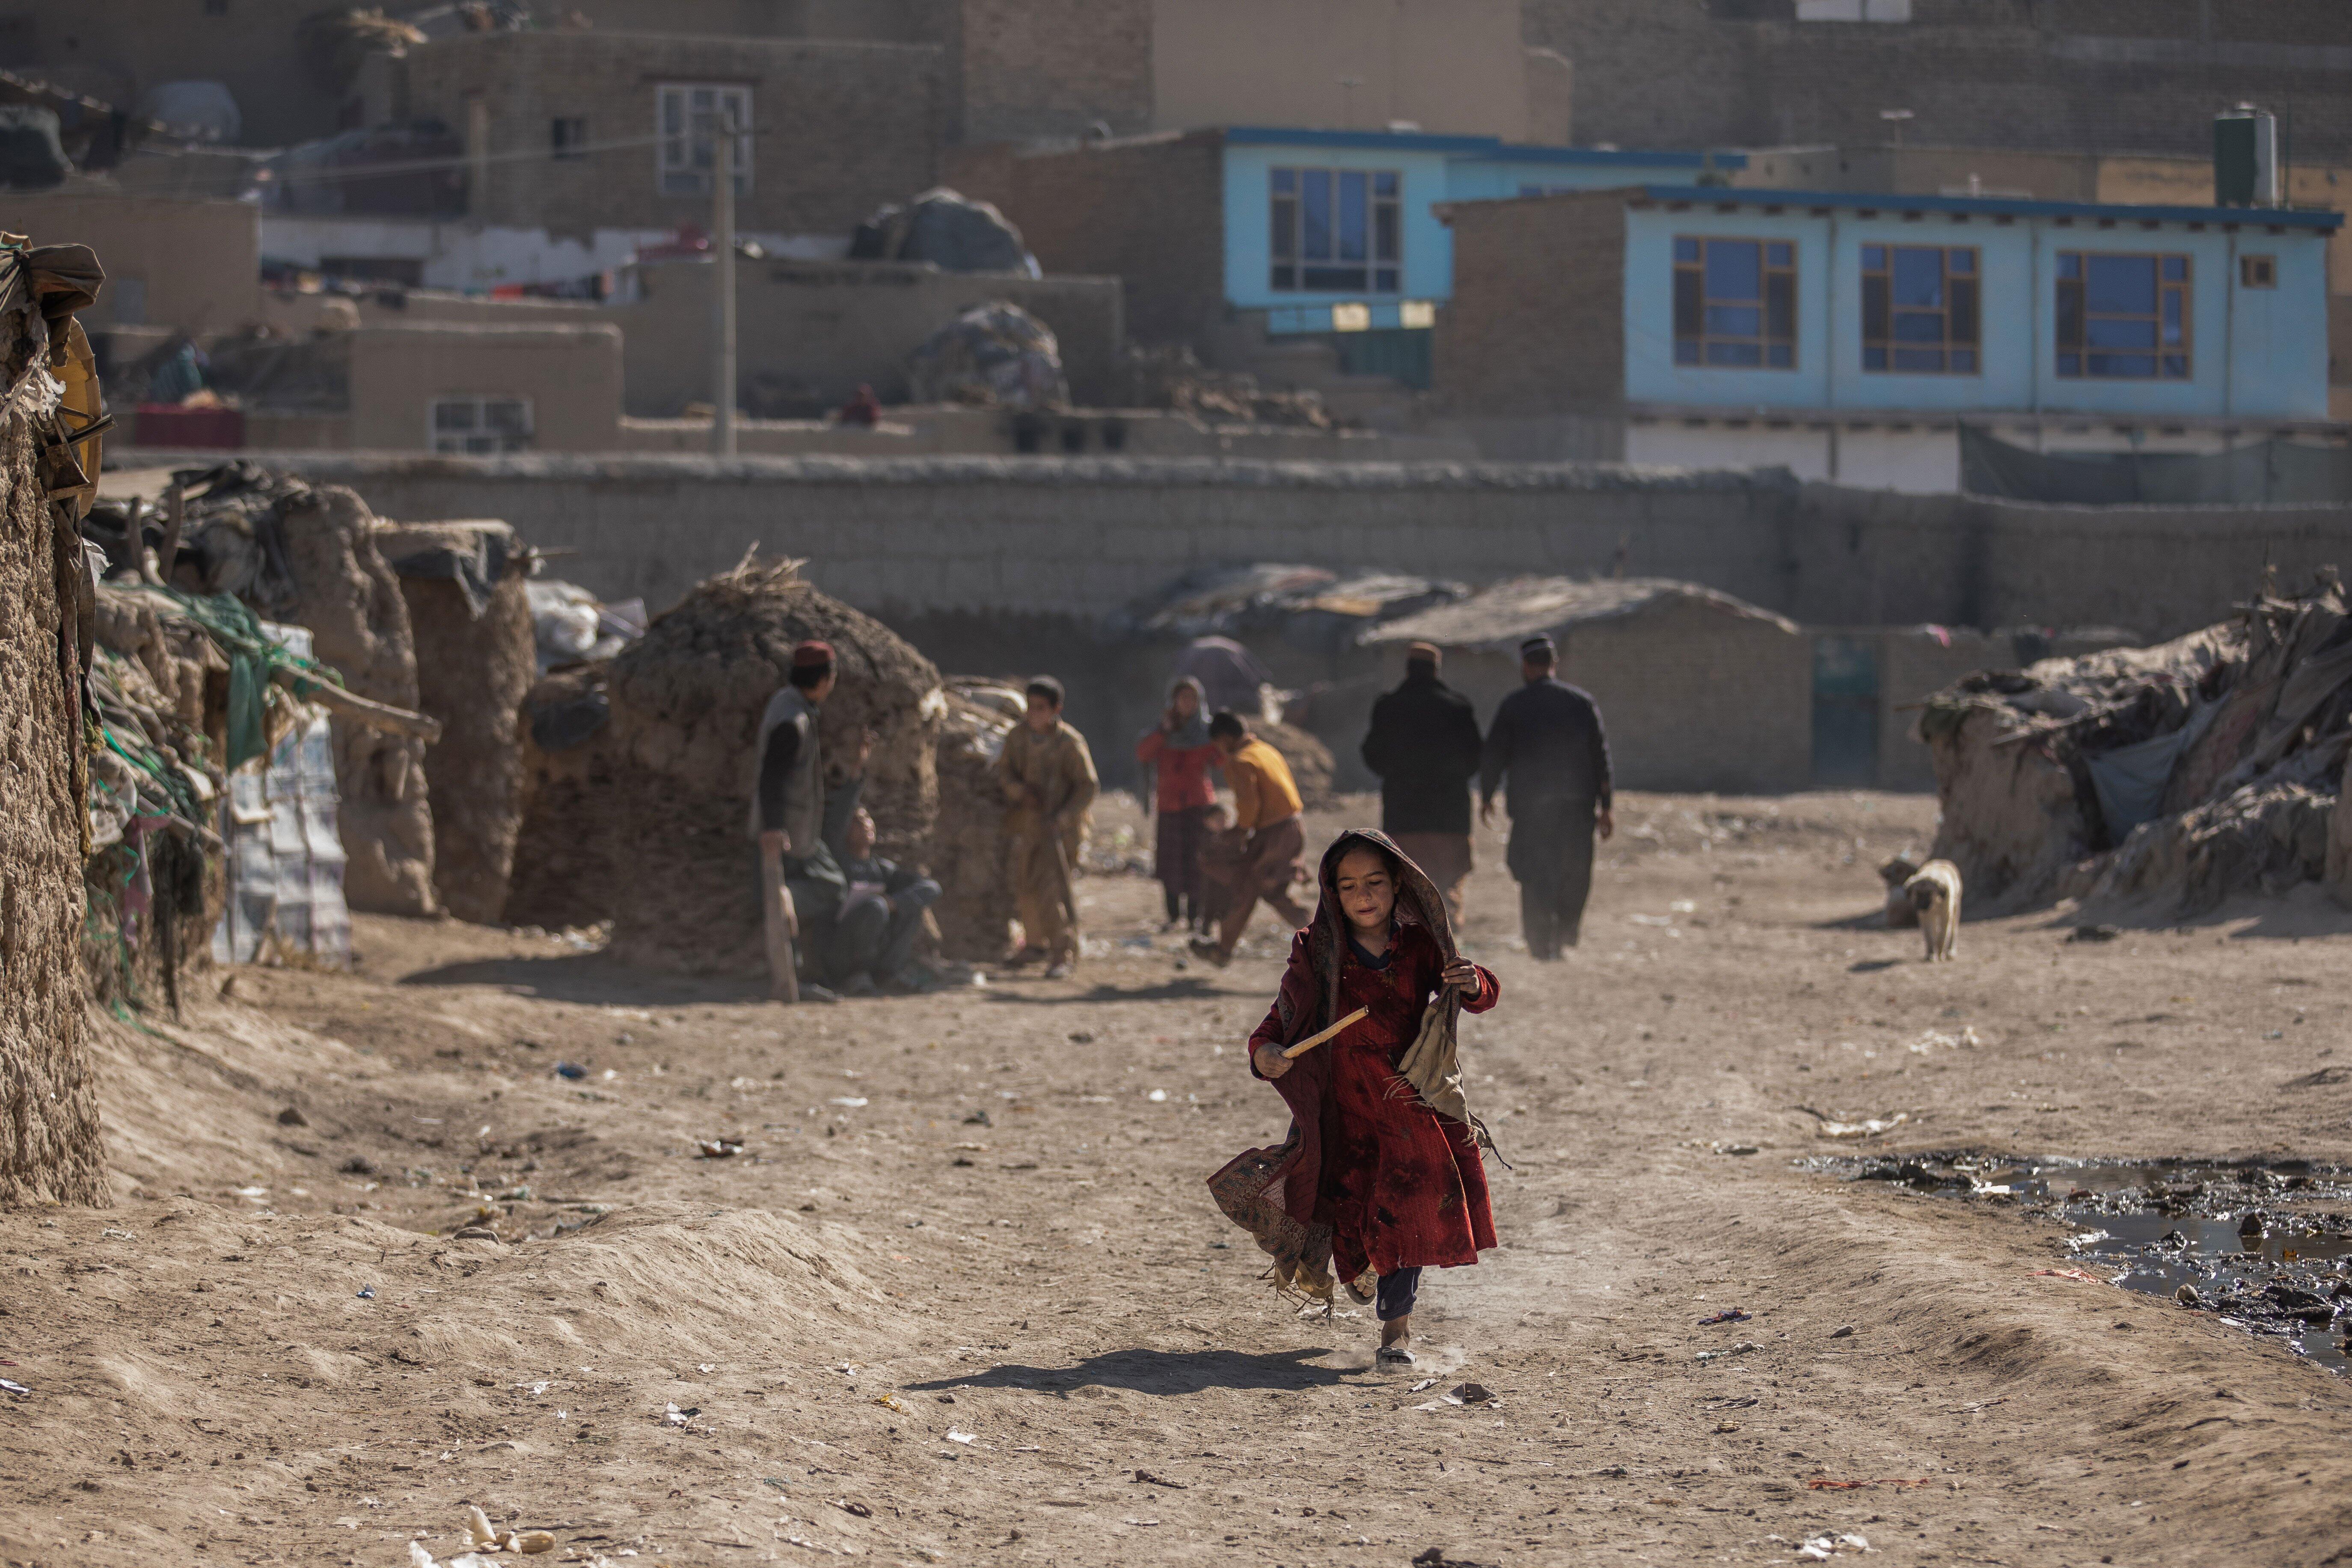 A girl in a red dress runs through a camp for displaced people in Kabul, Afghanista. There are people an makeshift homes in the background. 